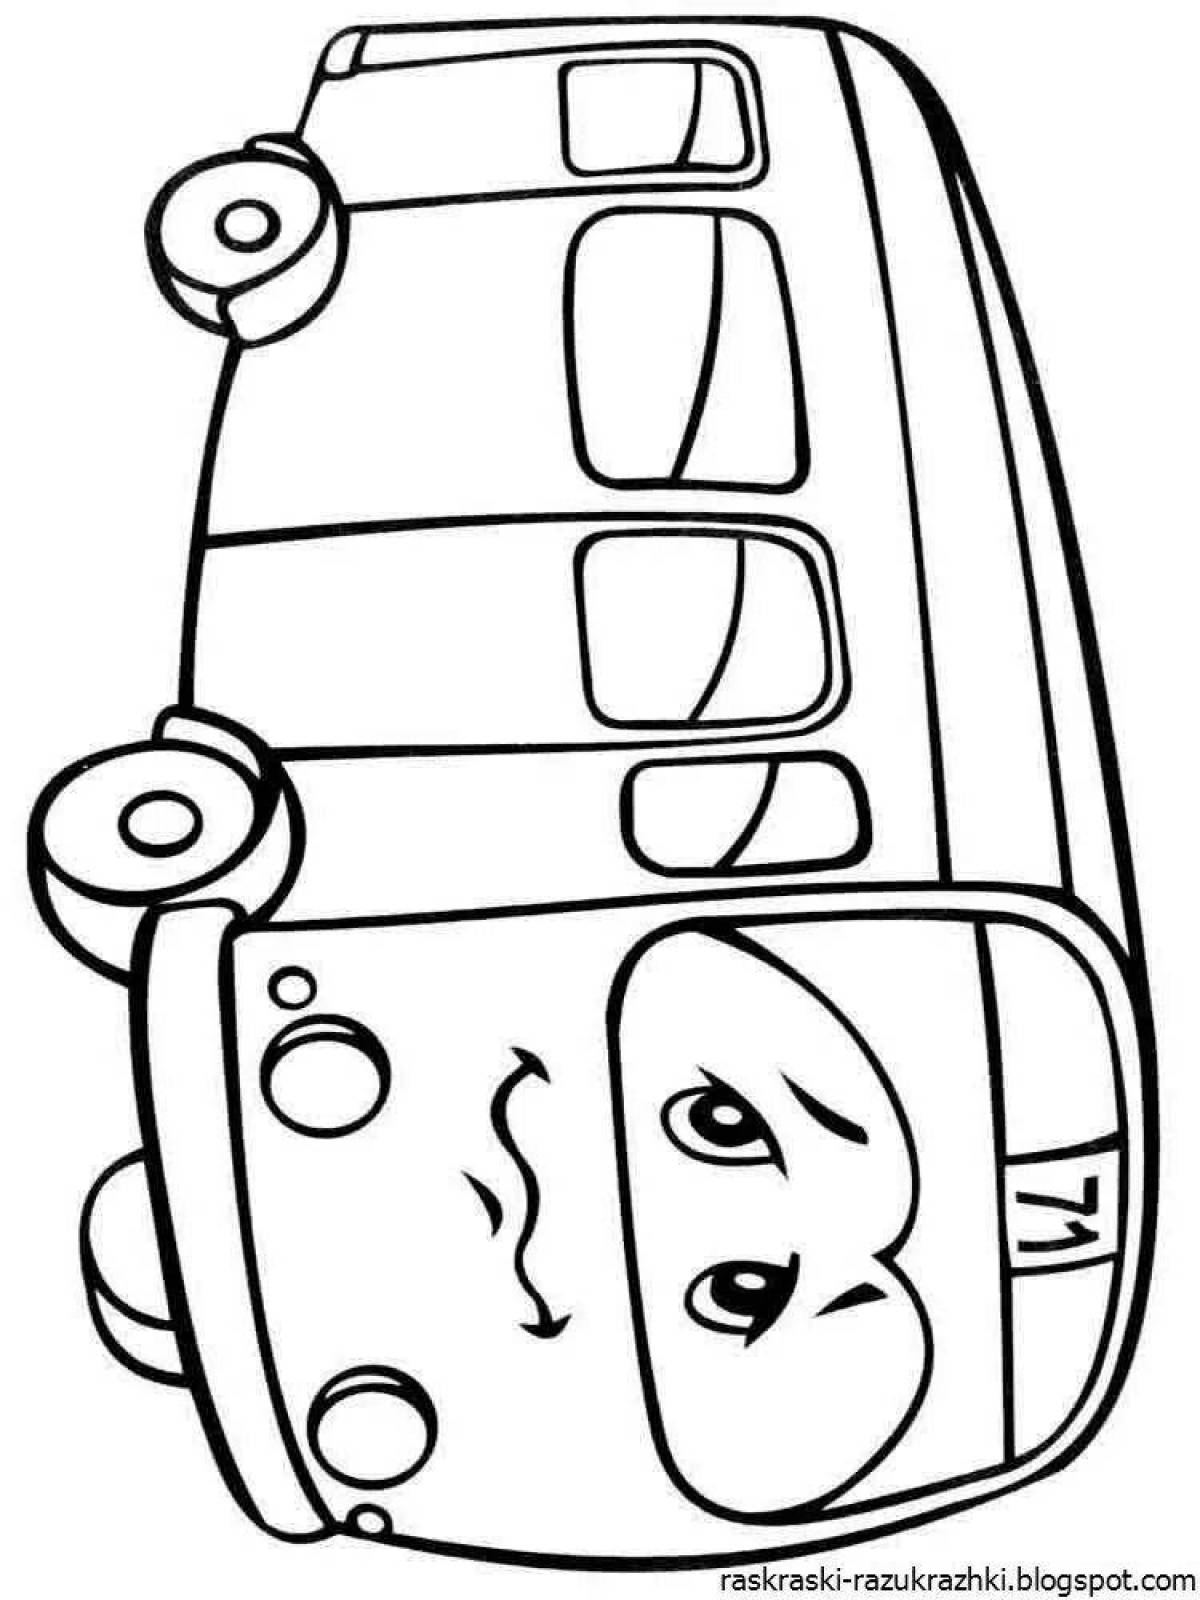 Creative bus coloring book for 3-4 year olds